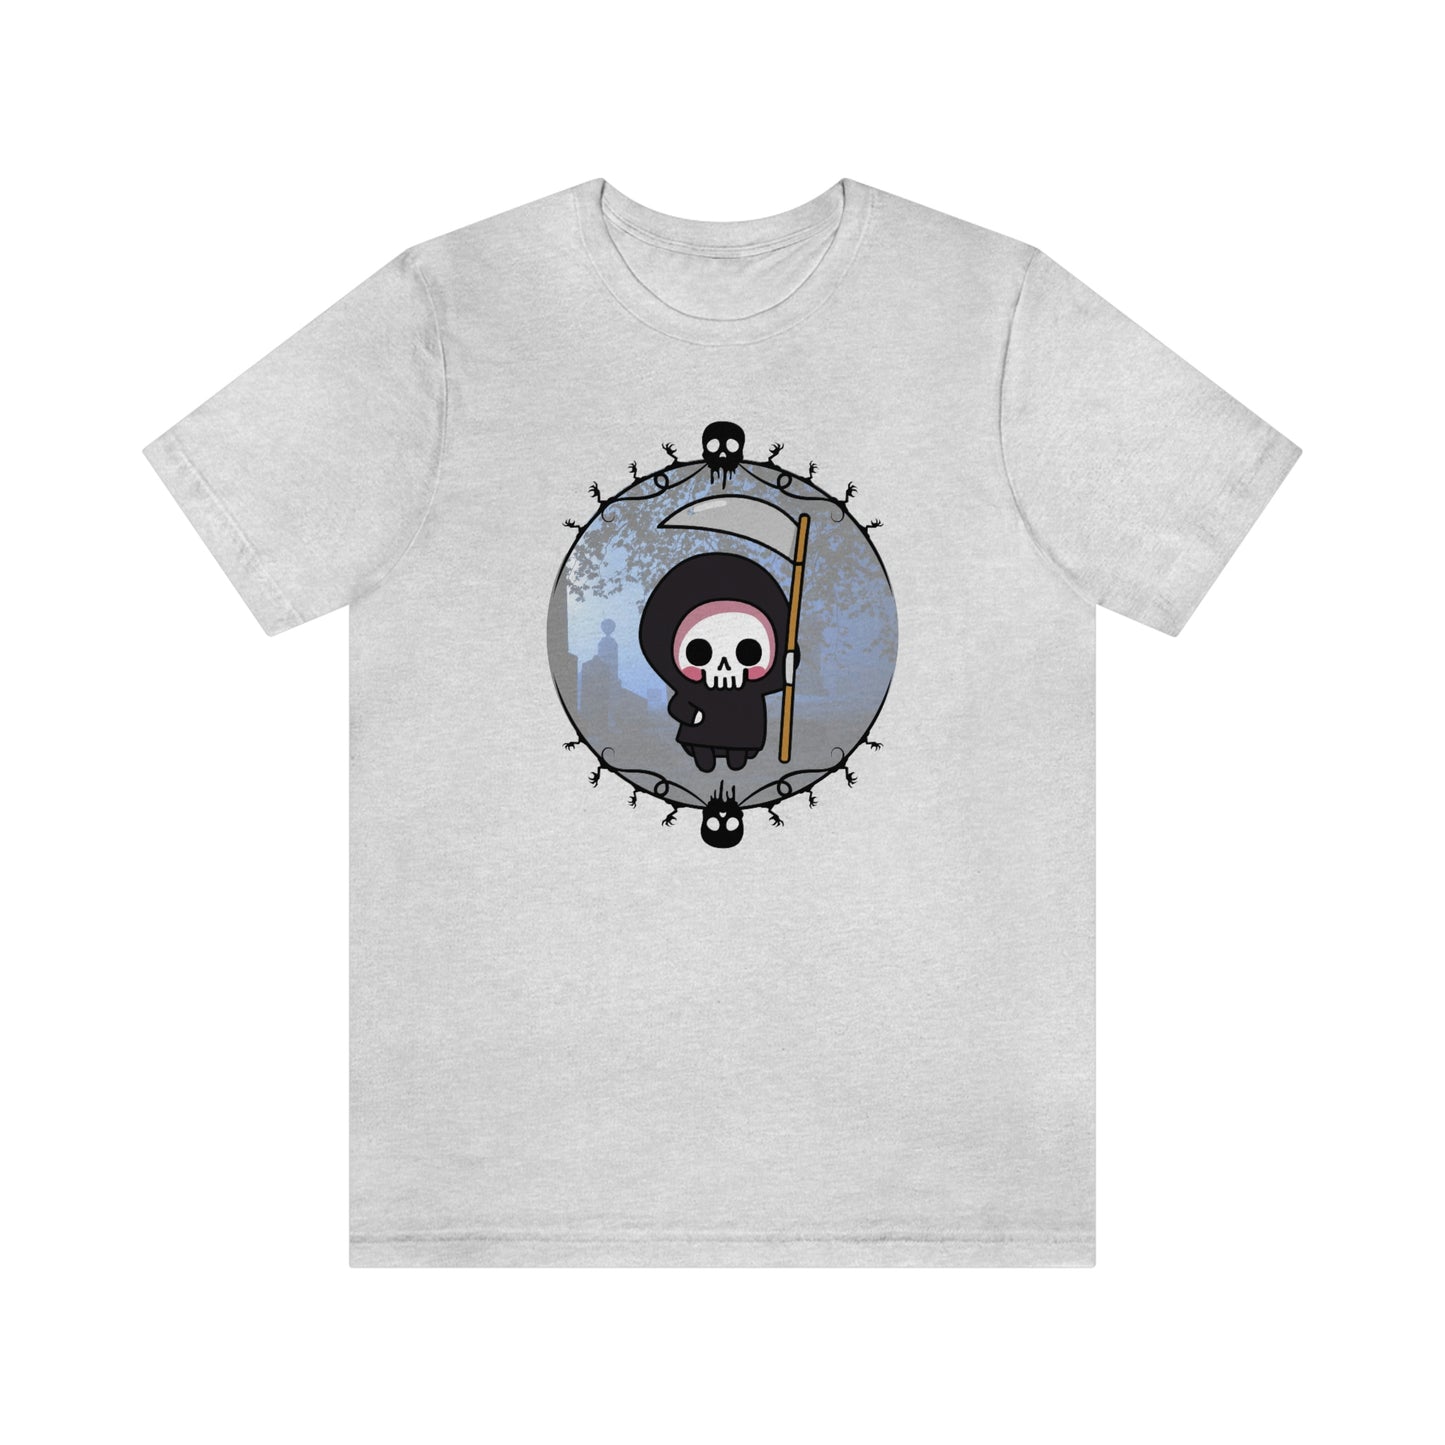 Kawaii Grim Reaper Gothic Shirt- Great for Pastel Goth Look Lord and Lady Towers